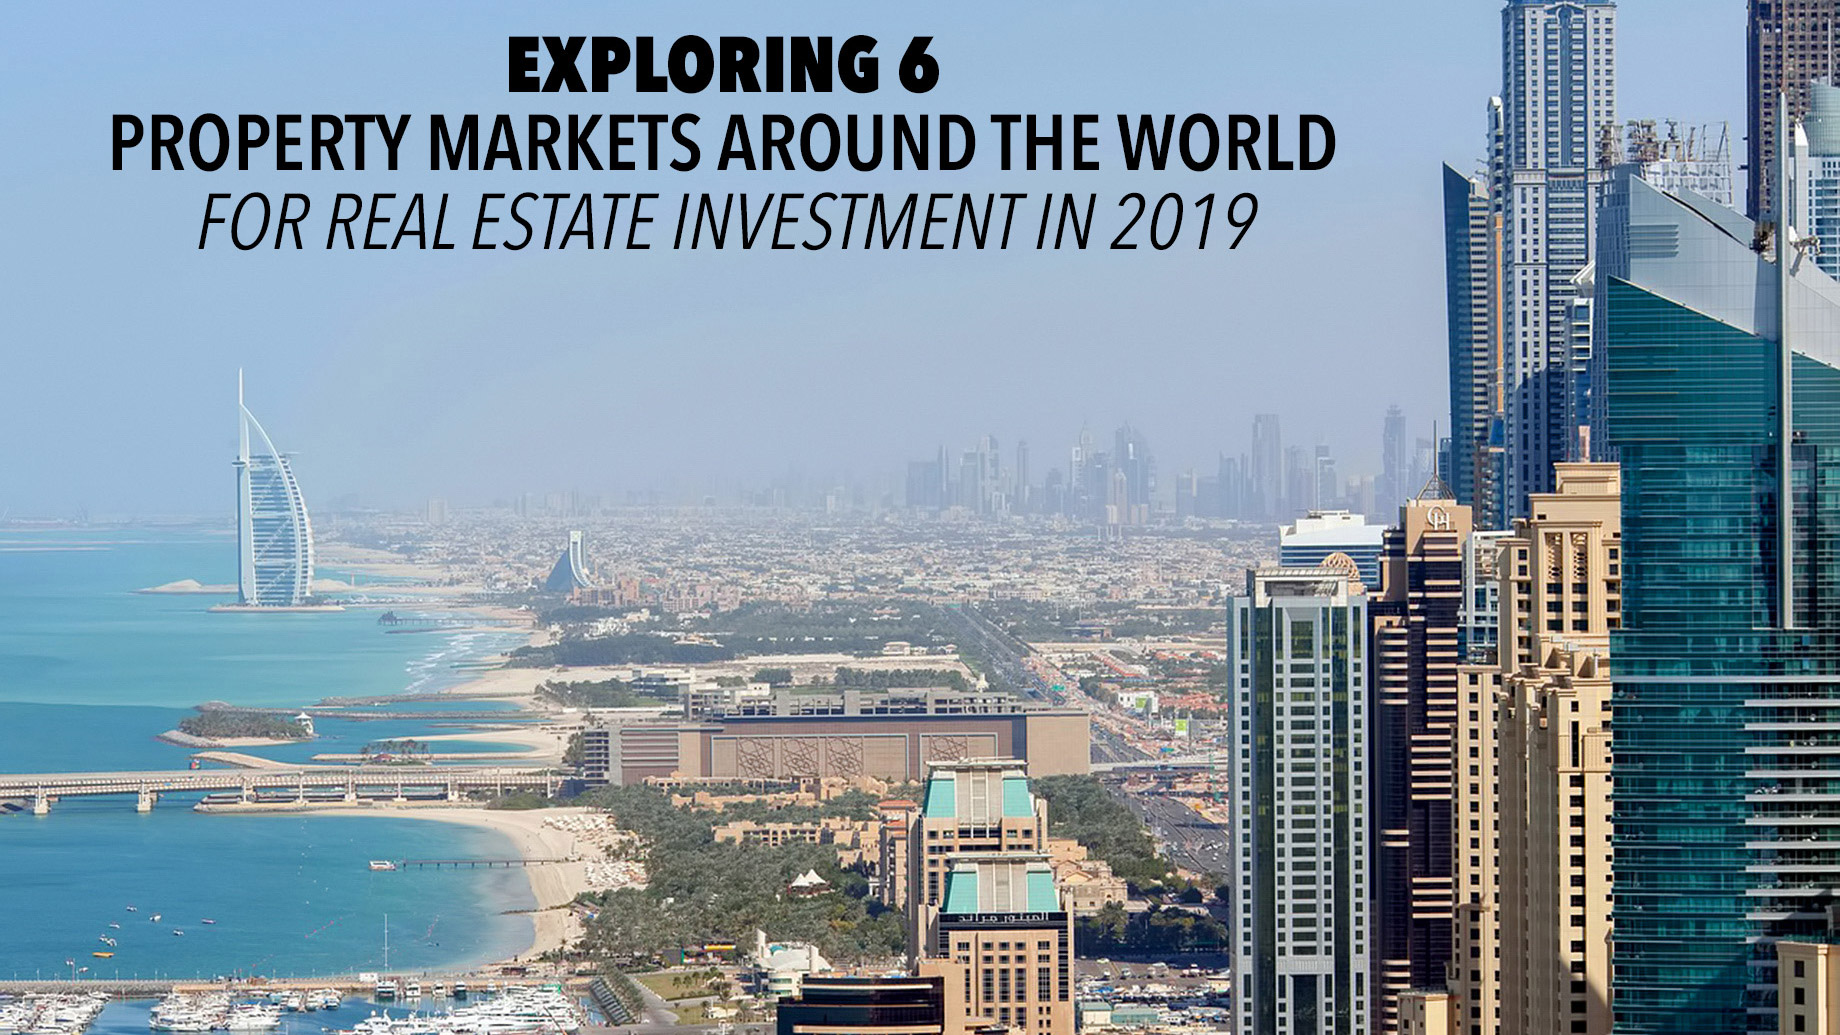 Exploring 6 Property Markets Around the World for Real Estate Investment in 2019